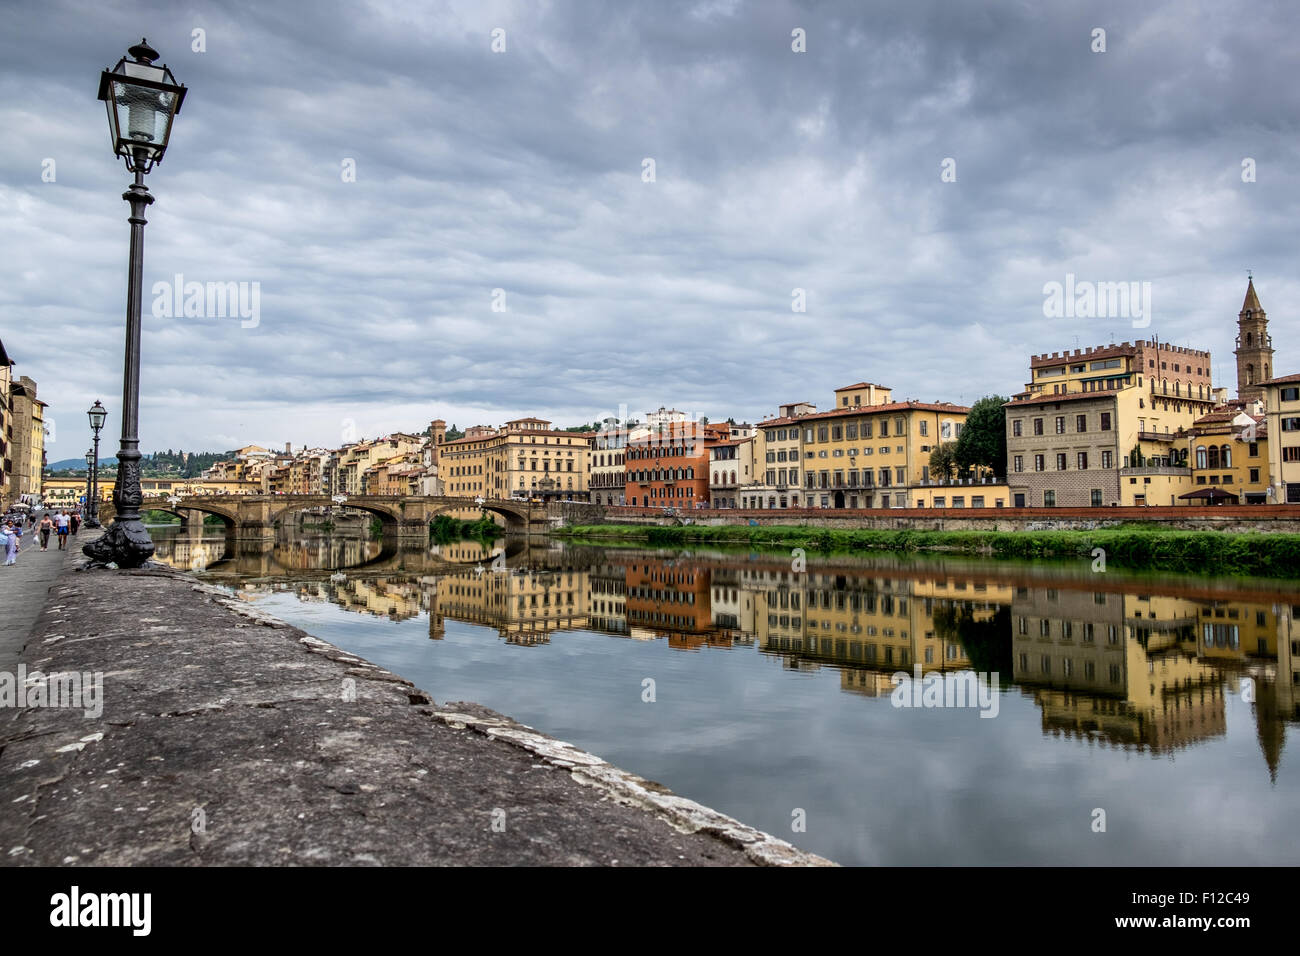 Riverside view along the river Arno looking towards Ponte Vecchio, florence Italy Stock Photo